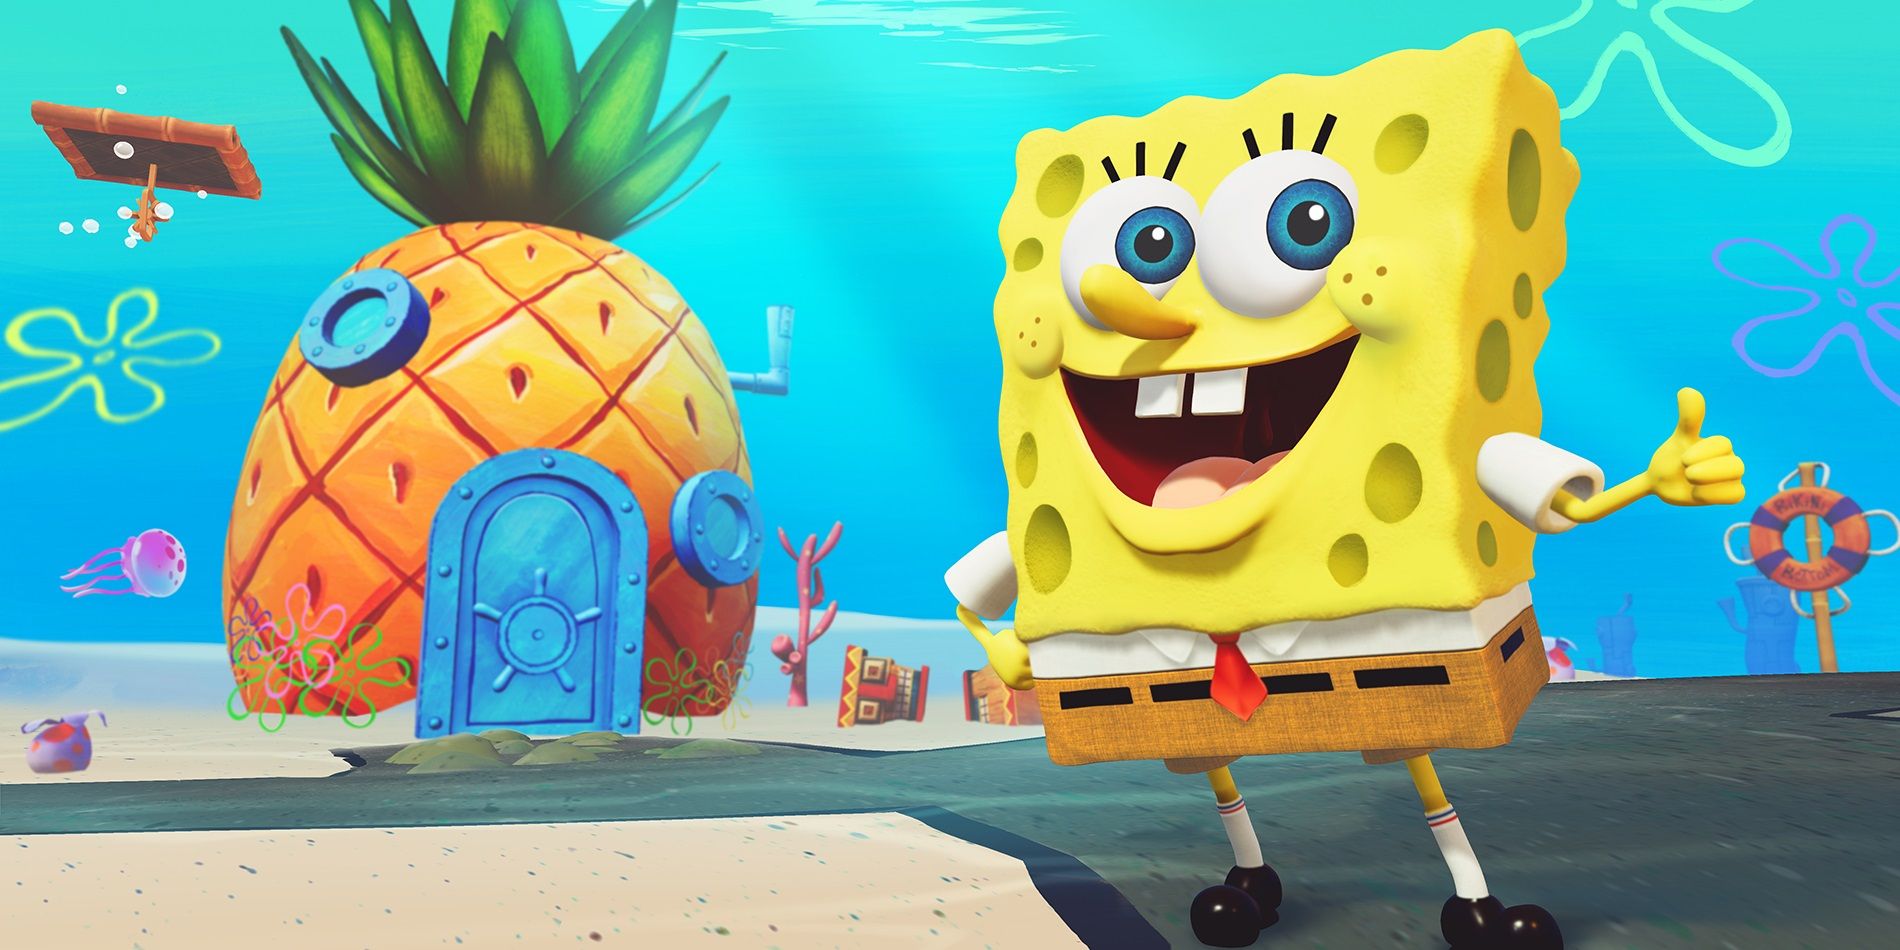 Spongebob gives a thumbs up for the remaster of Battle for Bikini Bottom.